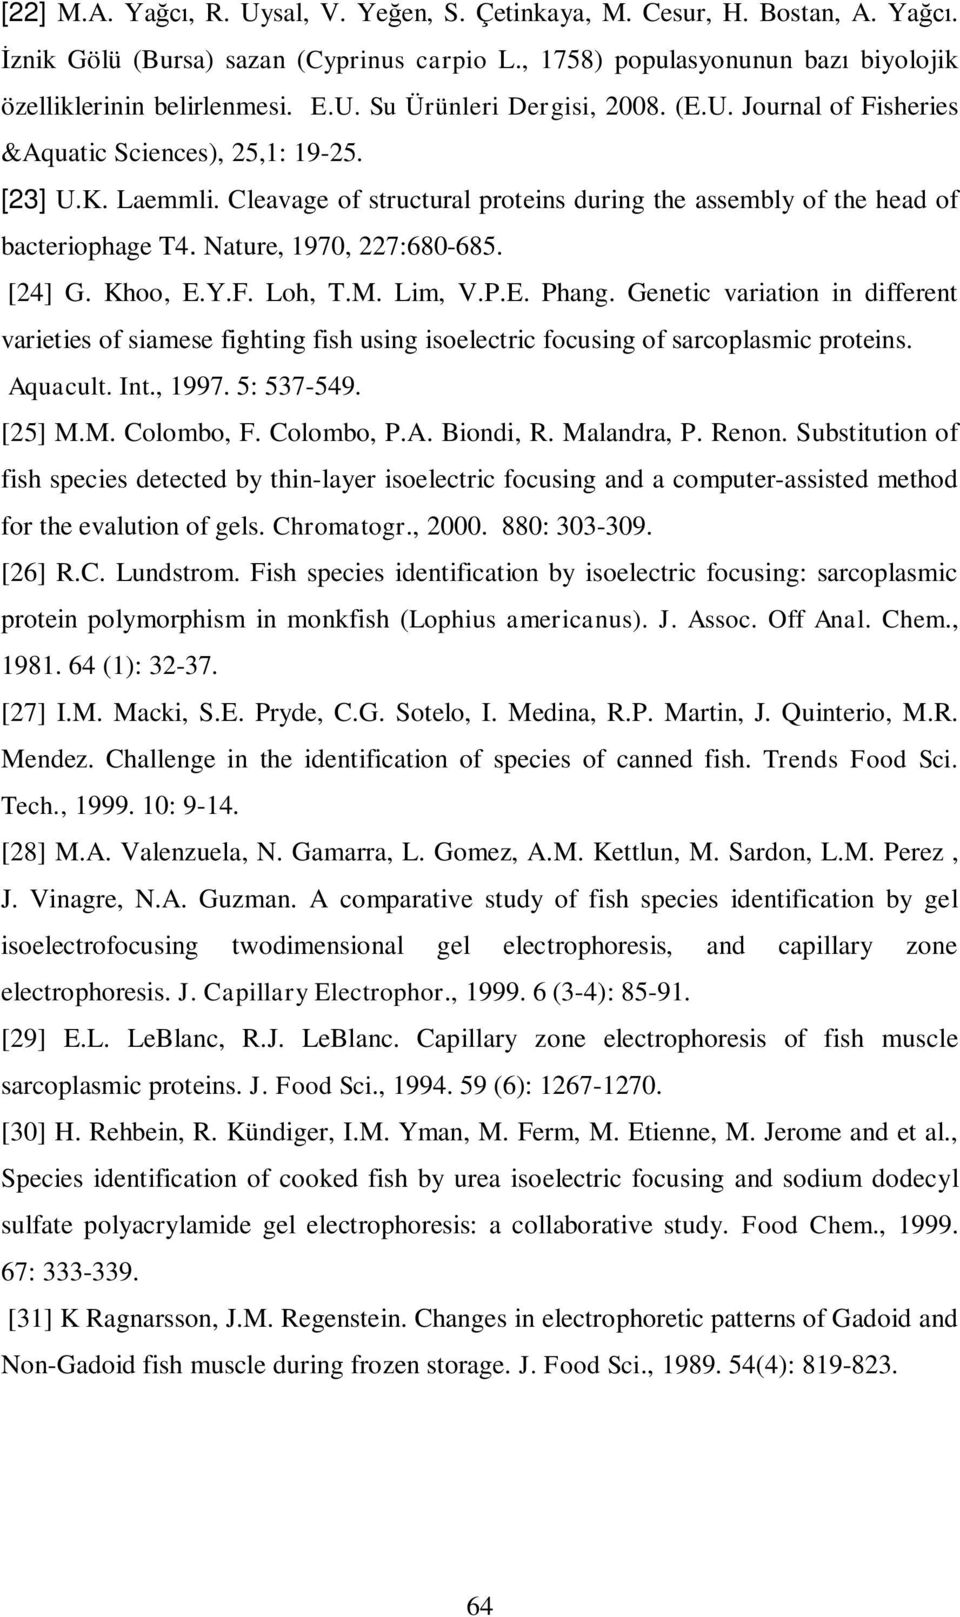 Khoo, E.Y.F. Loh, T.M. Lim, V.P.E. Phang. Genetic variation in different varieties of siamese fighting fish using isoelectric focusing of sarcoplasmic proteins. Aquacult. Int., 1997. 5: 537-549.